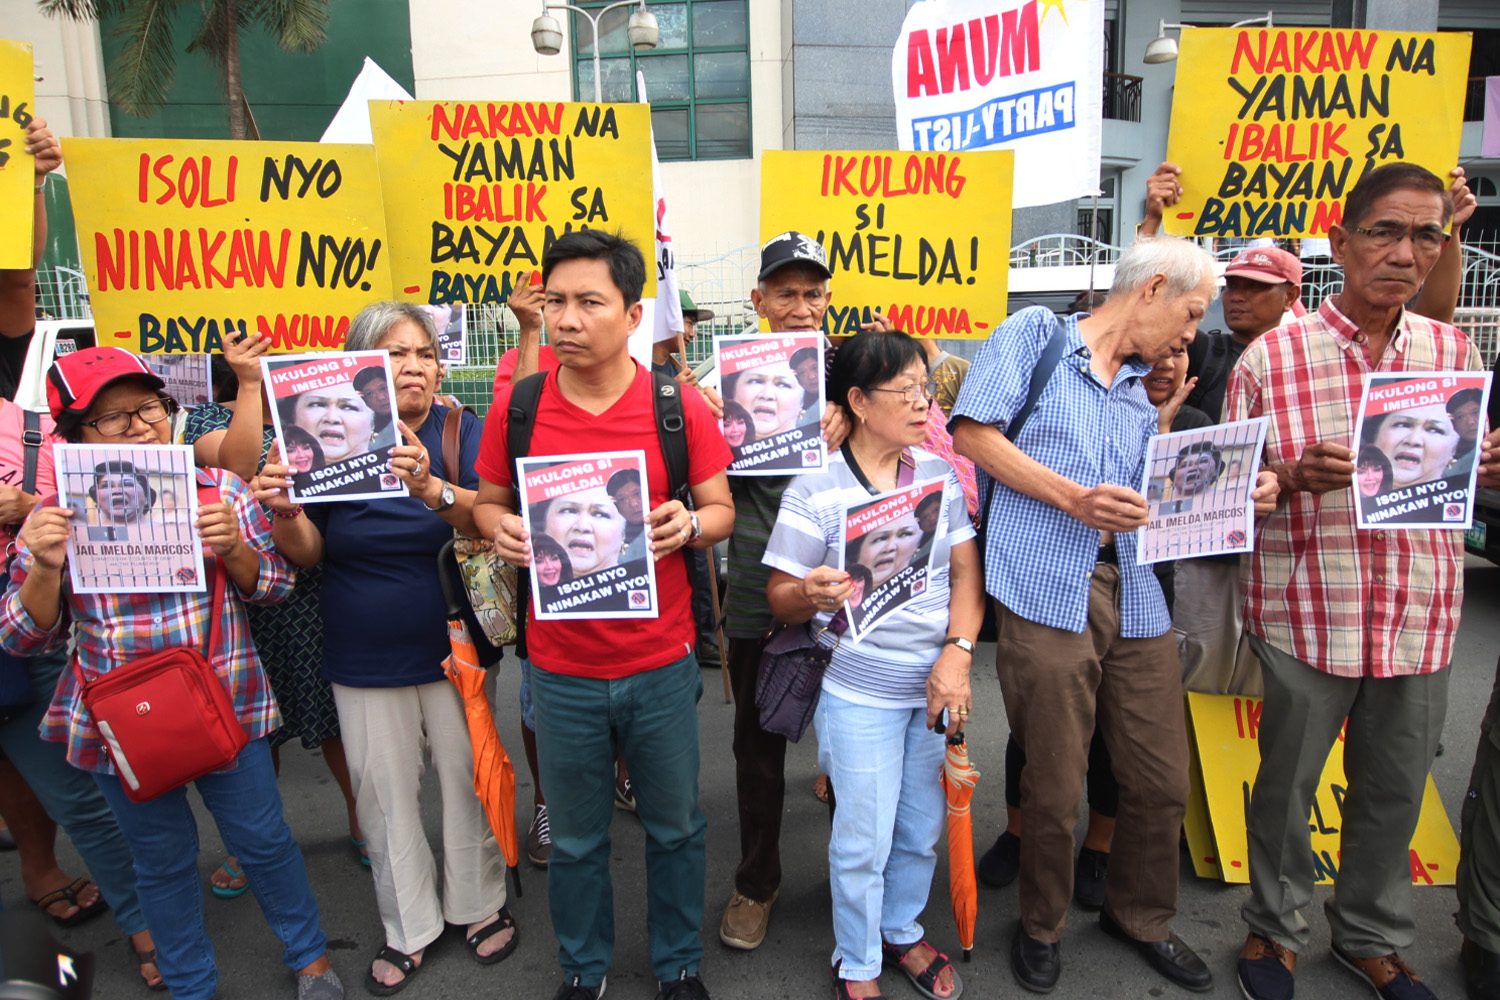 What’s taking the Sandiganbayan long to issue warrant vs Imelda Marcos?